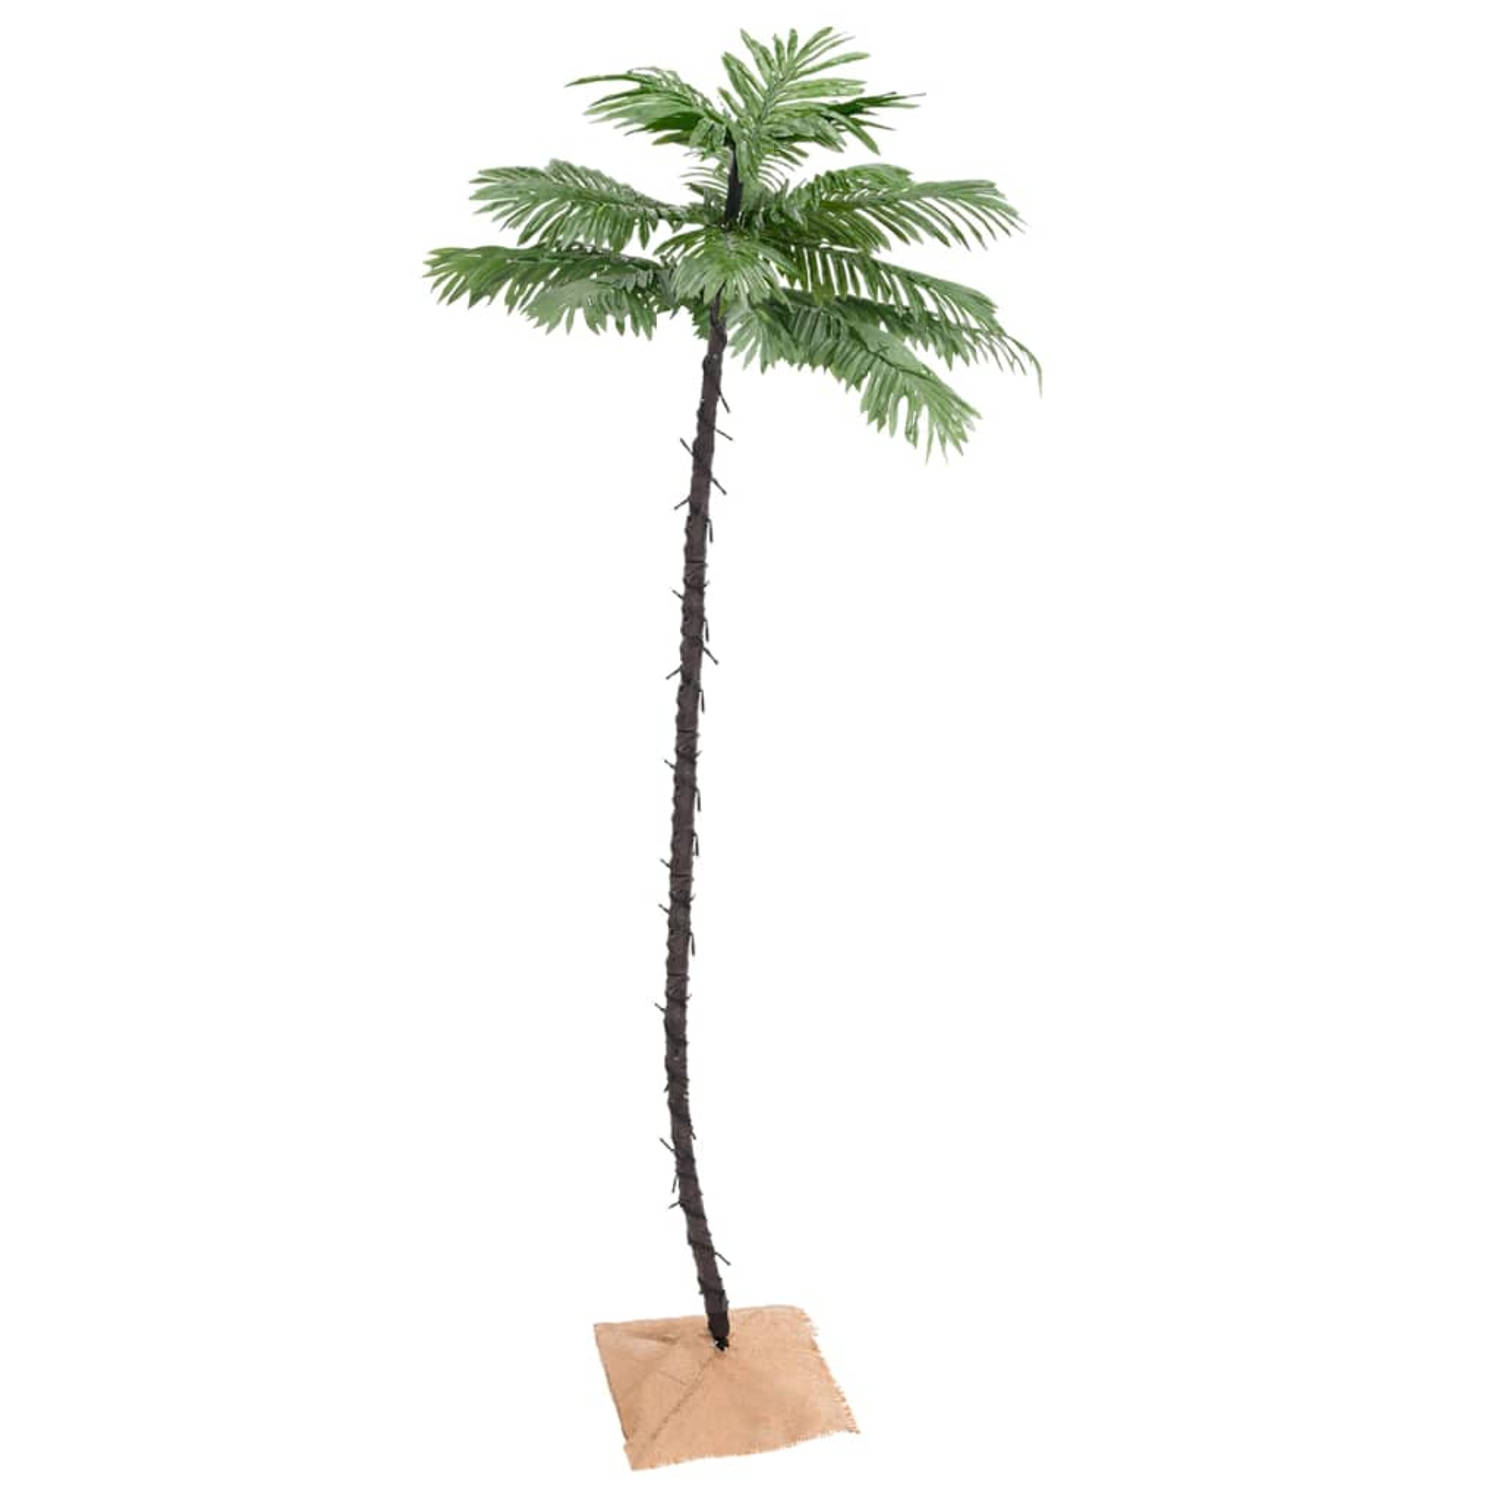 The Living Store Palmboom LED 136 LED's warmwit 220 cm - Decoratieve kerstboom